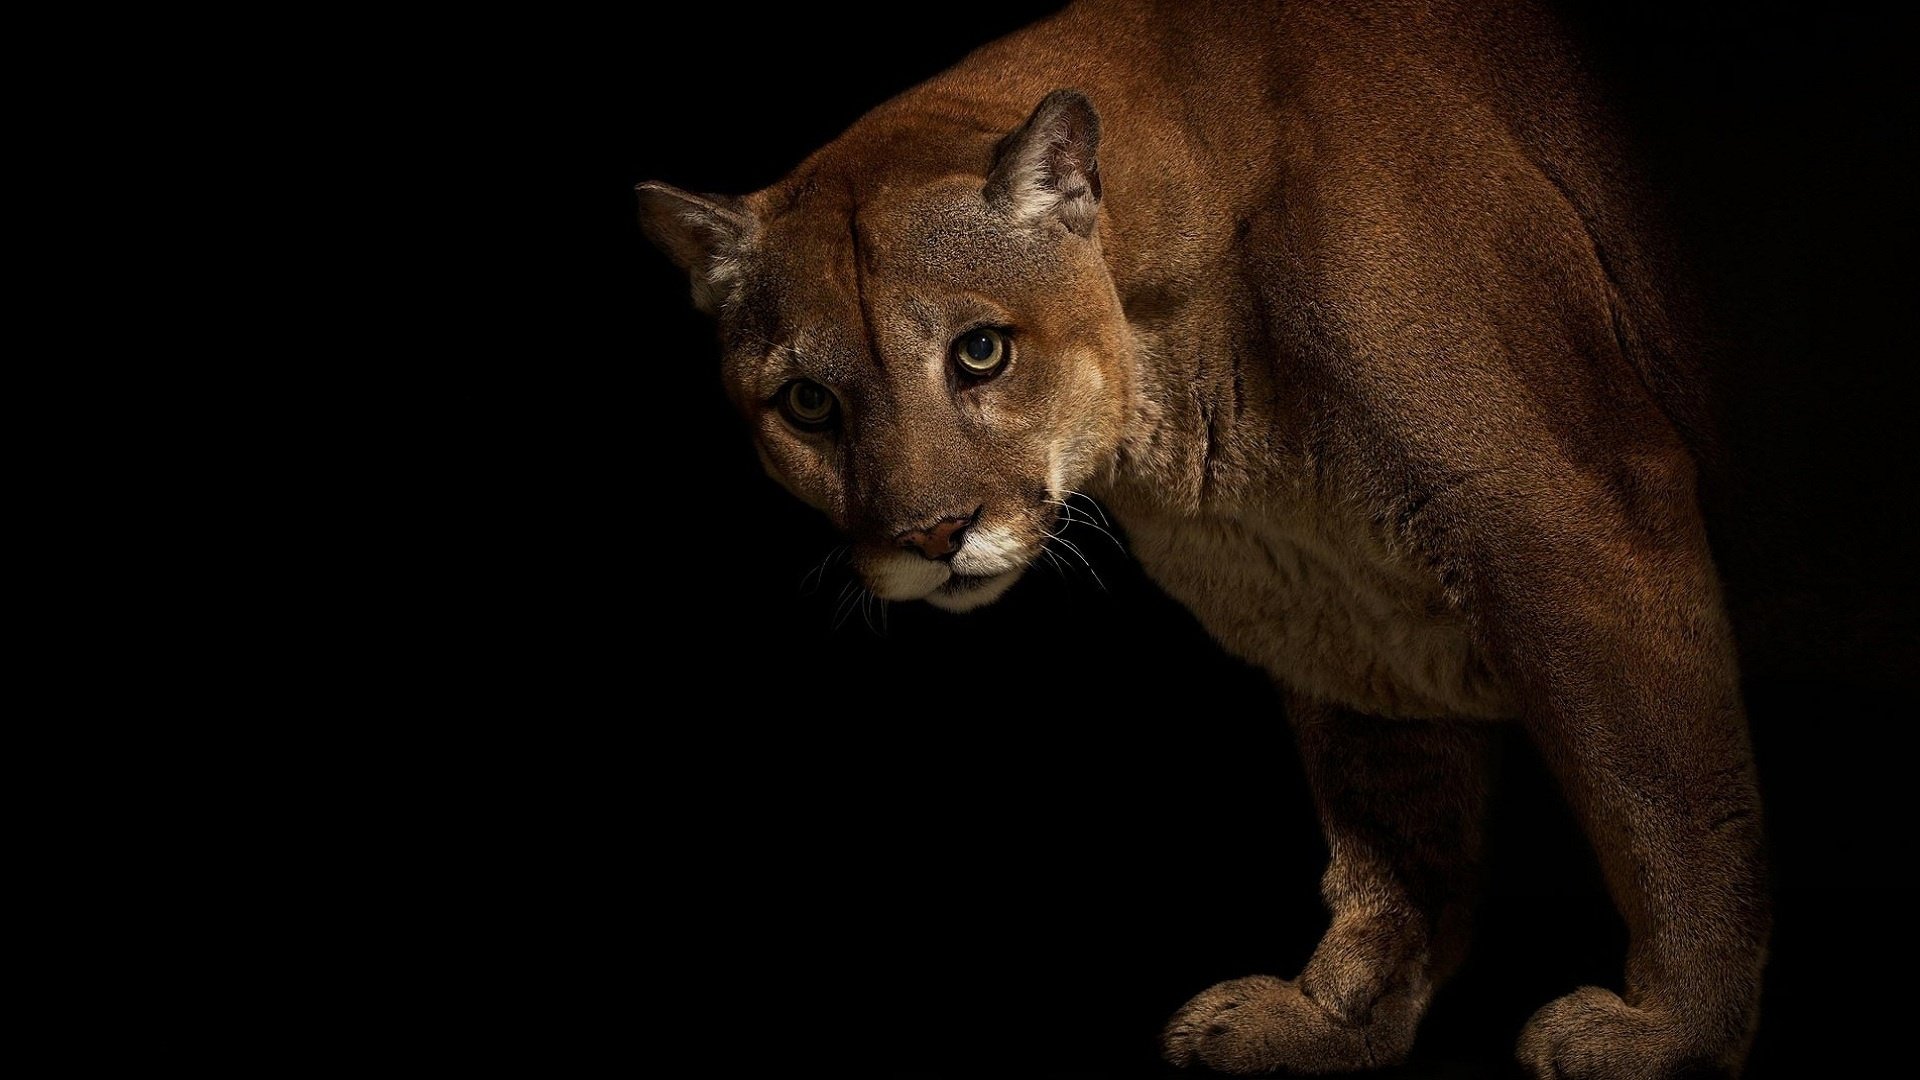 Download full hd 1920x1080 Cougar desktop background ID:81757 for free